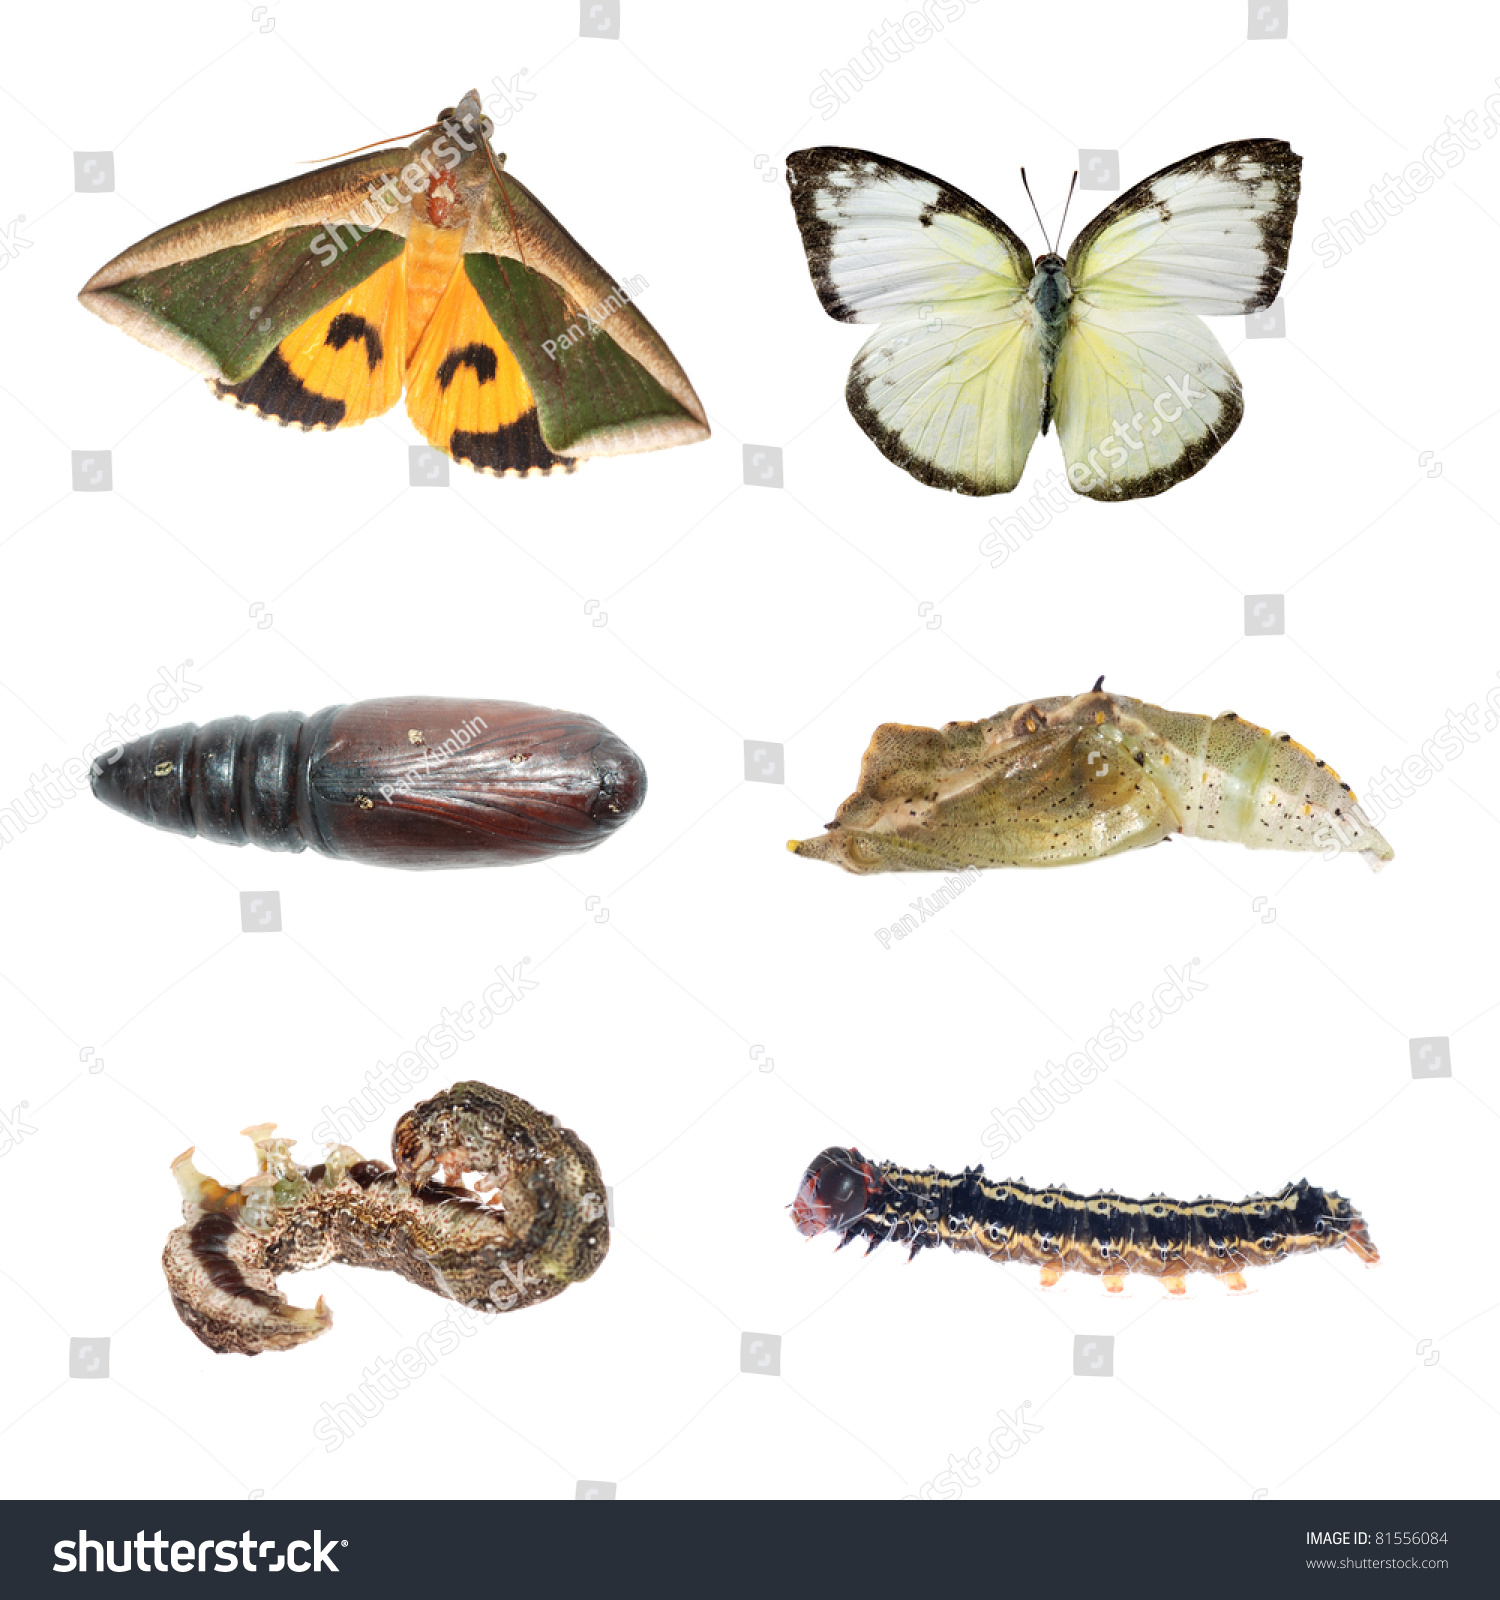 Butterfly And Moth Life Cycle Isolated On White Stock Photo 81556084 ...